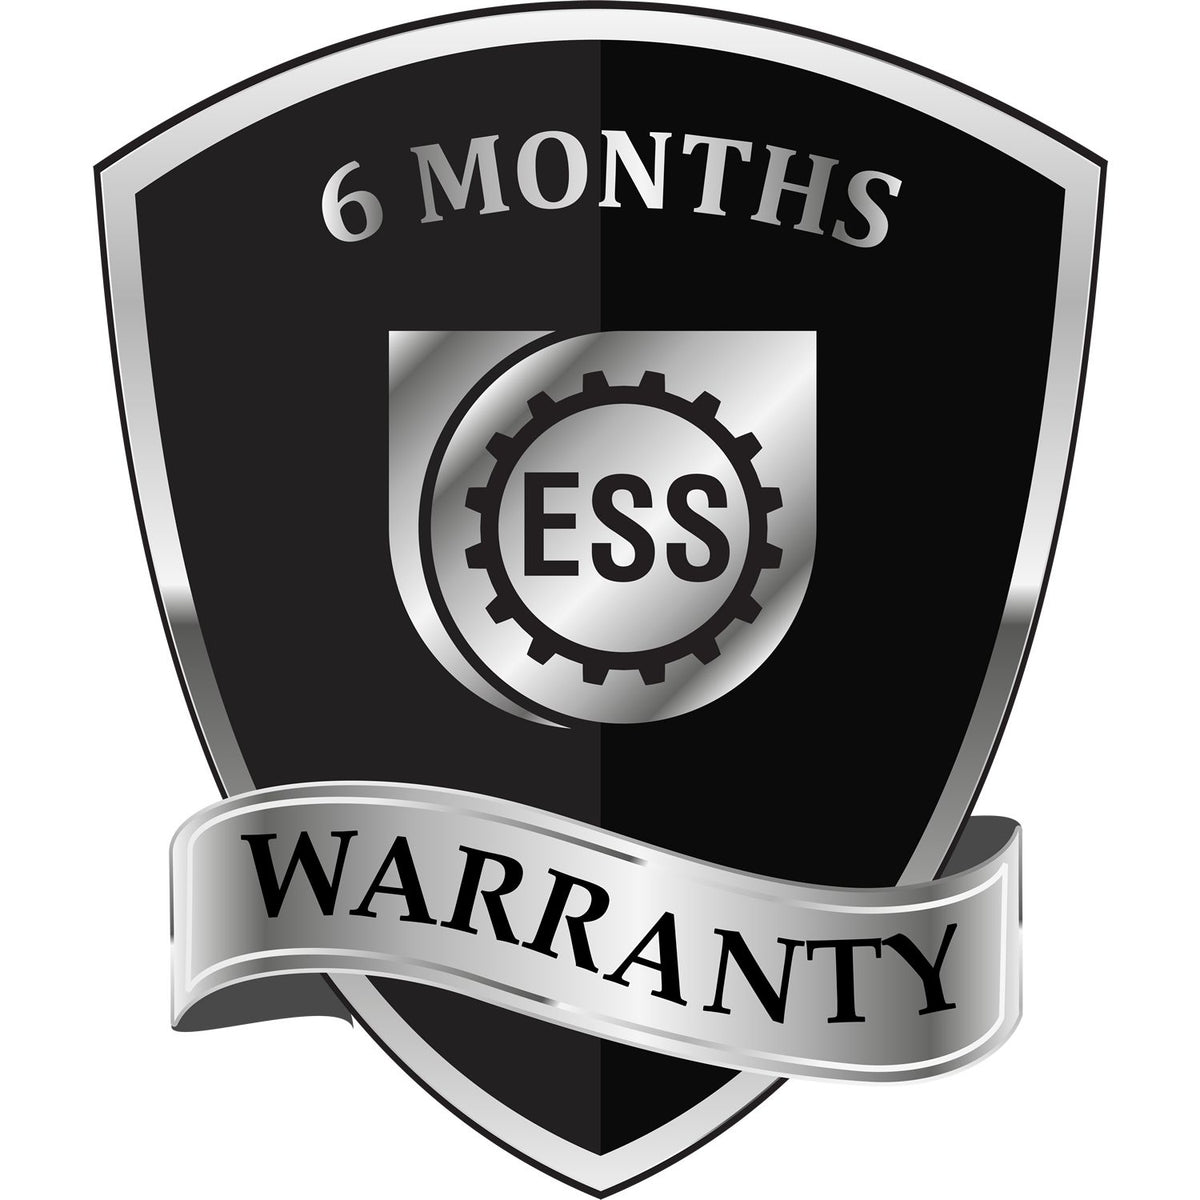 A badge or emblem showing a warranty icon for the Self-Inking Utah PE Stamp